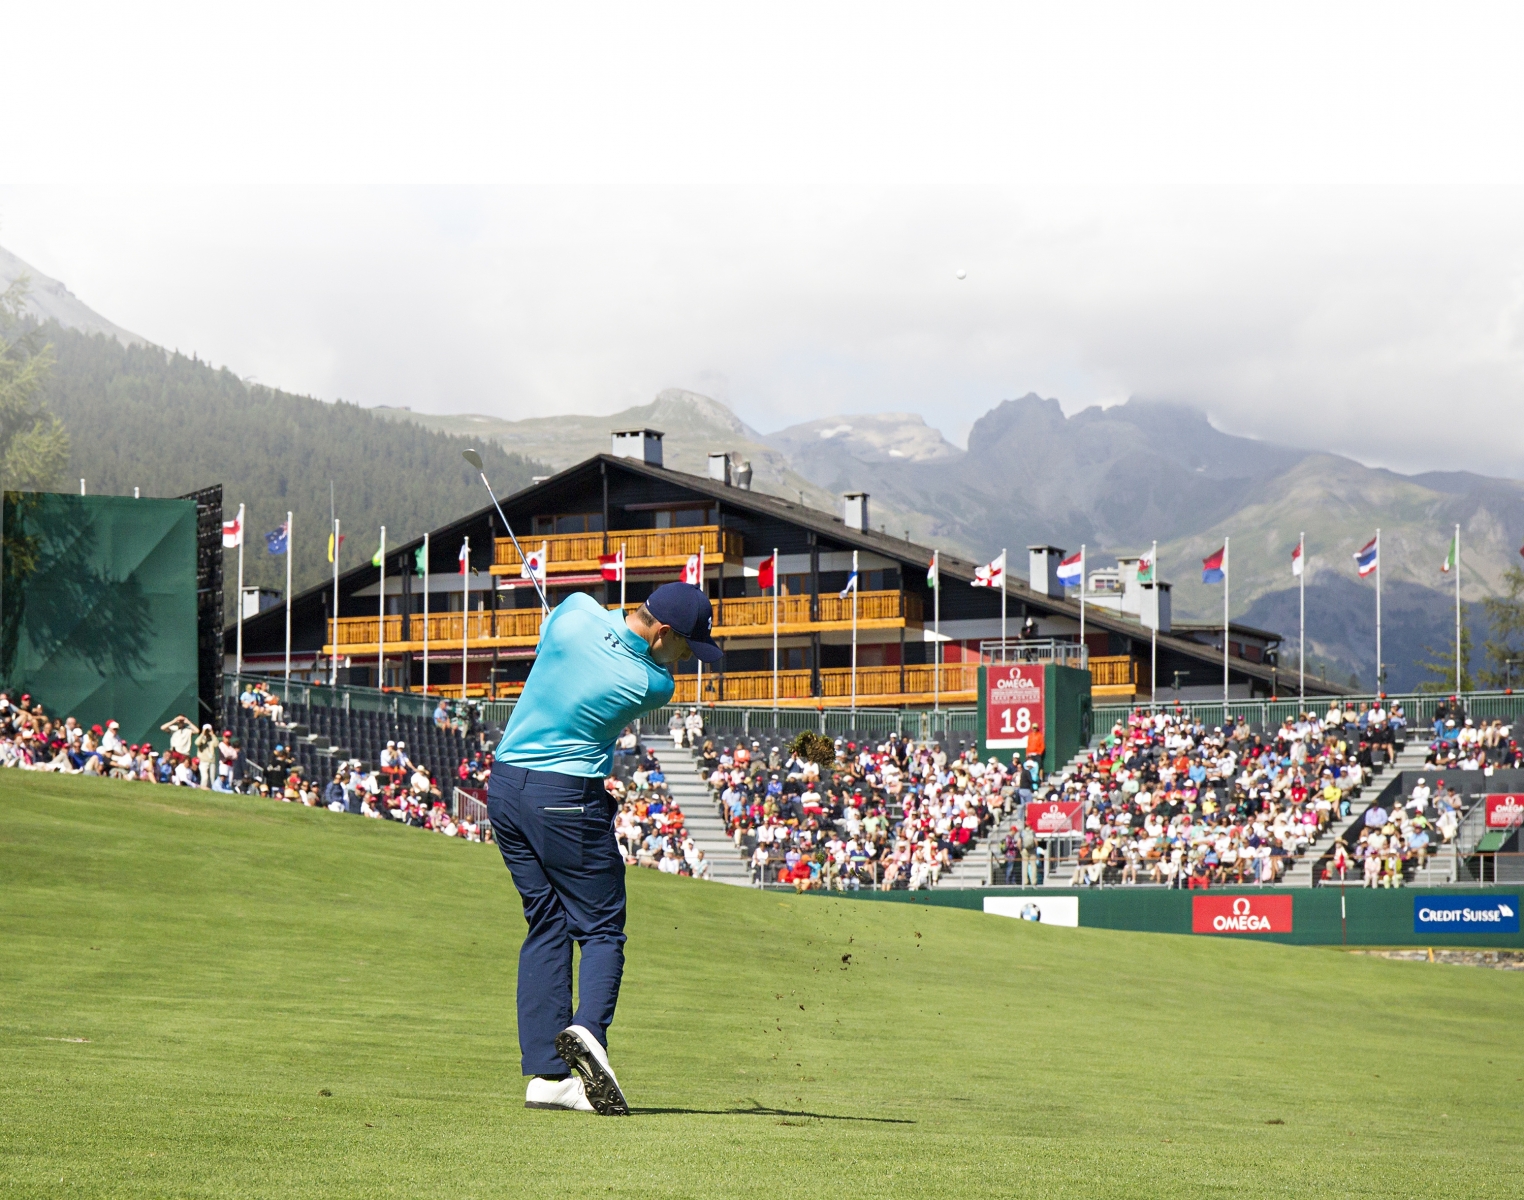 HANDOUT - Matthew Fitzpatrick from England during the Omega European Masters in Crans-Montana on july 25th 2015. (PHOTOPRESS/OMEGA)crans-montana GOLF EUROPEAN MASTERS 2015 CRANS MONTANA